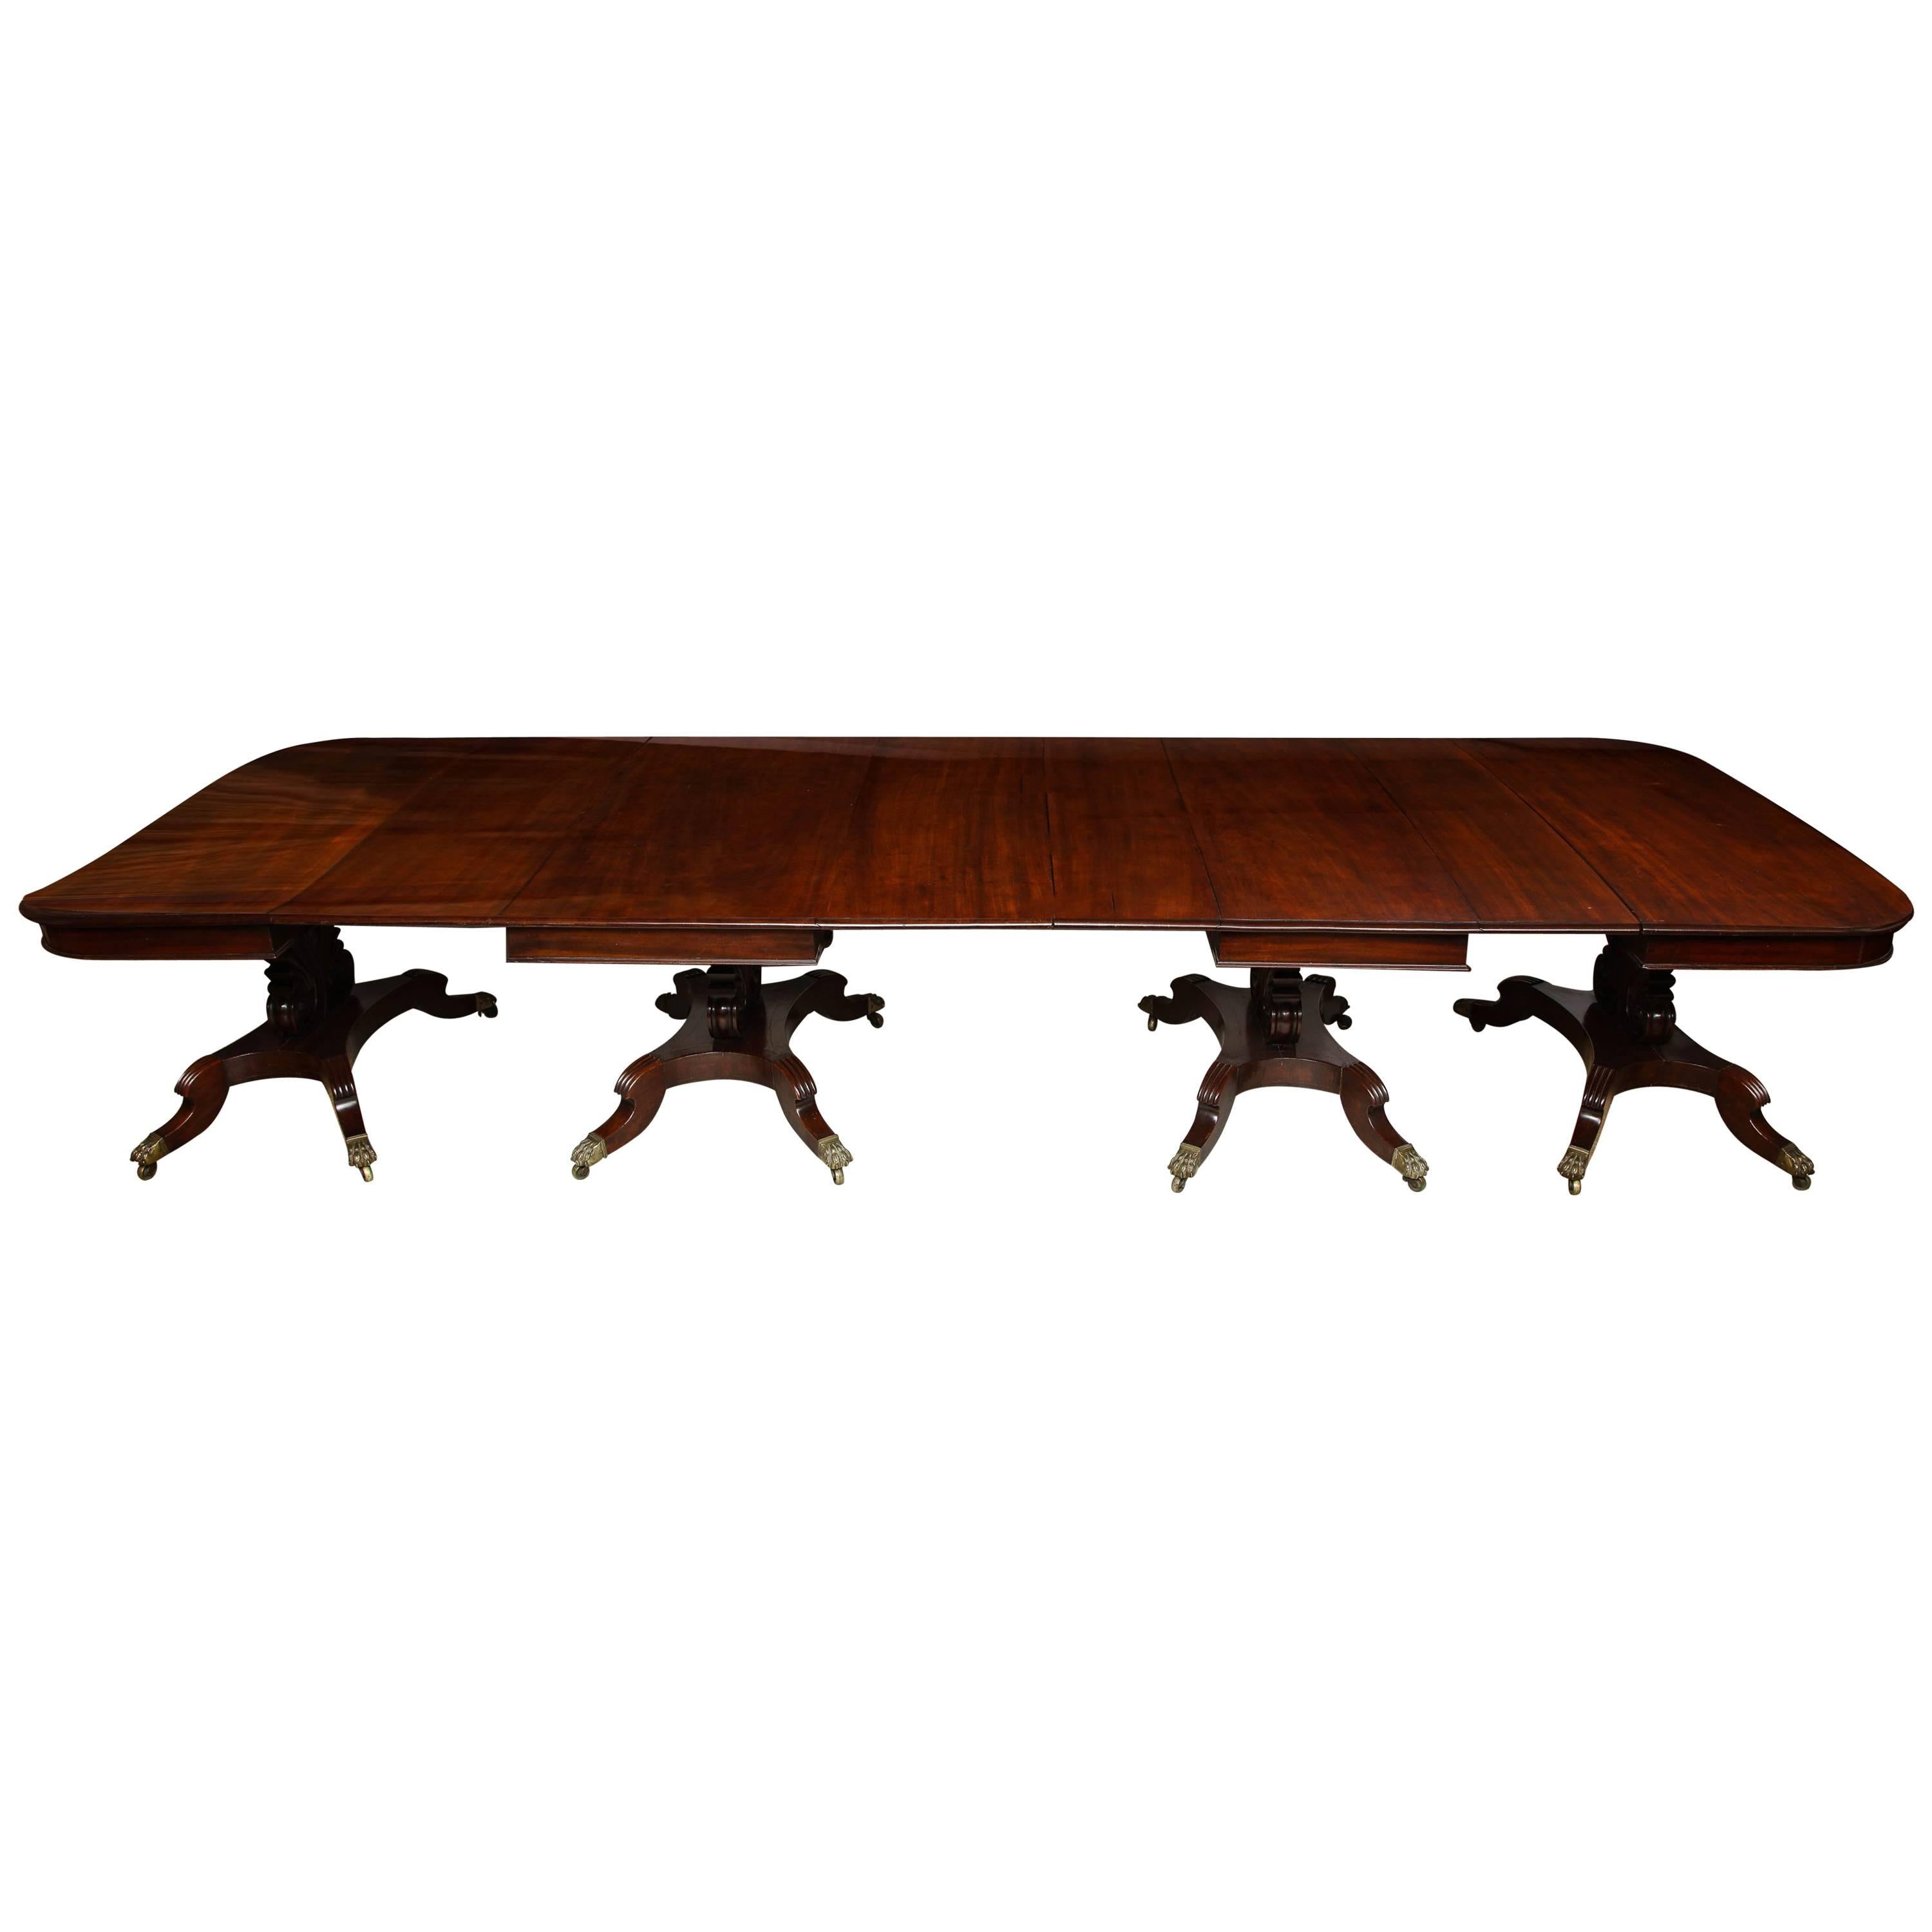 Huge Classical Boston Banquet Table